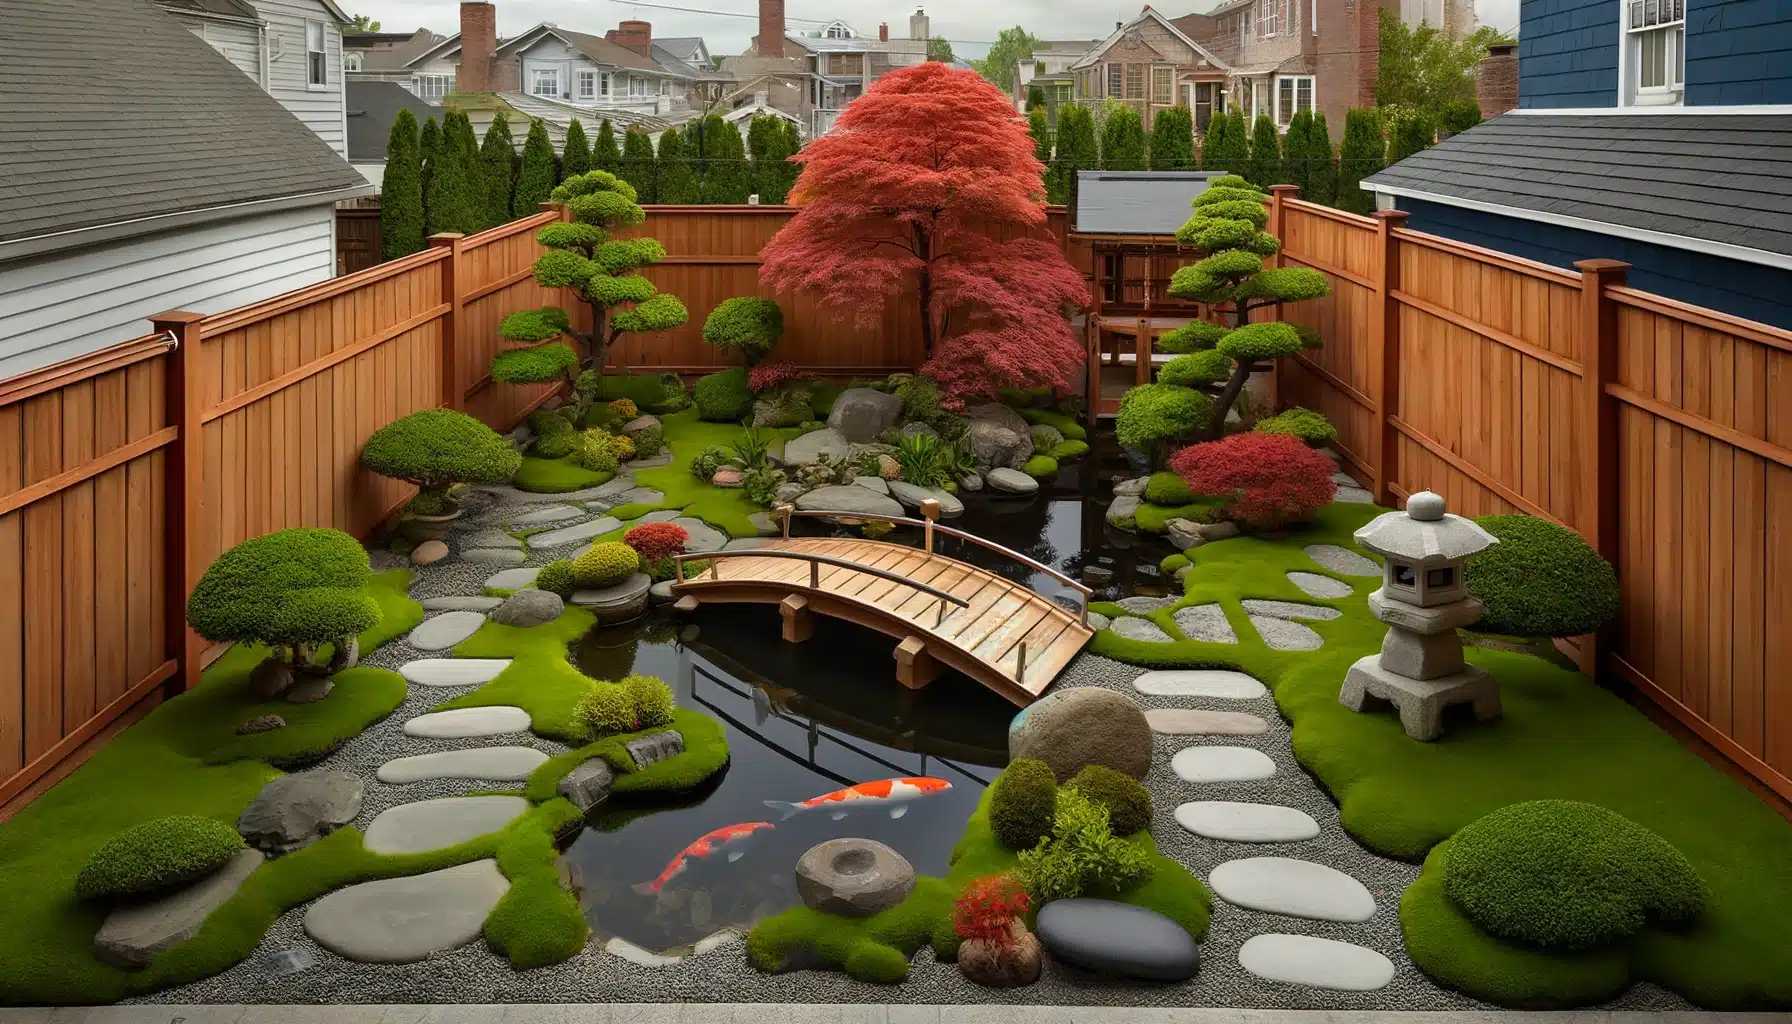 a Japanese garden designed in a suburban backyard in the USA. The scene includes a small koi pond with a simple wooden bridge spanning it, reflecting the accessibility of suburban space. Surrounding the pond are miniature Japanese maple trees, pruned to perfection, with vibrant leaves. Carefully arranged stones and gravel paths create a Zen-like atmosphere. A traditional stone lantern is placed near the pond as a focal point. The garden is bordered by a typical wooden fence found in American suburbs, and beyond the fence, the roofs of neighboring houses can be seen. This blend of Japanese tradition and American suburbia reflects a peaceful coexistence of cultural aesthetics.